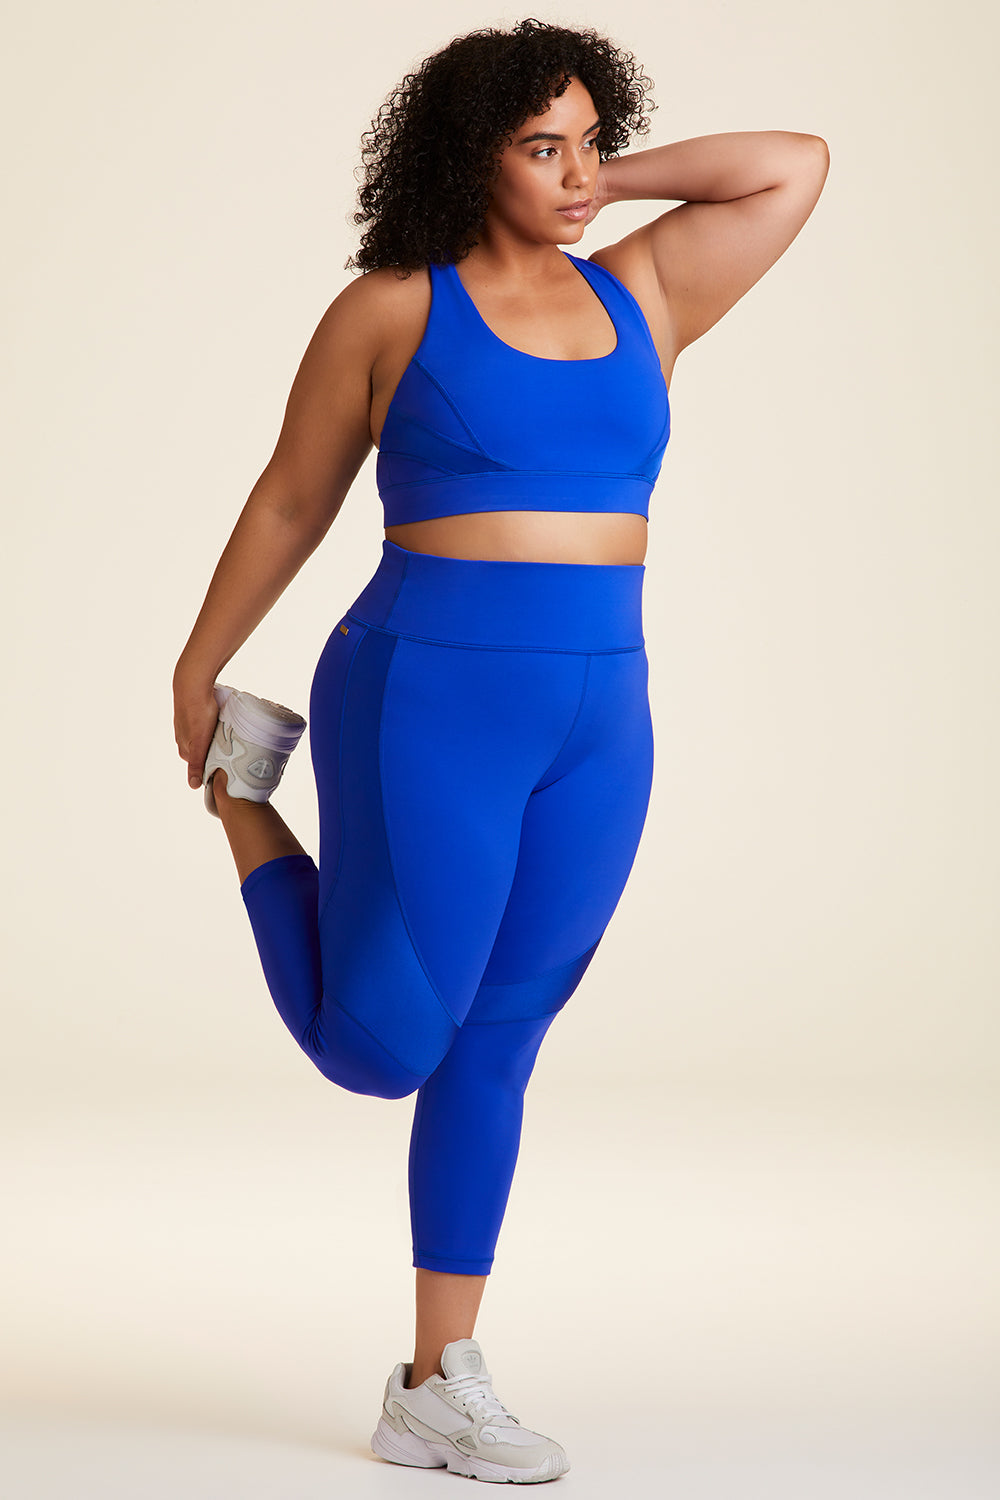 Side full body view of Alala Luxury Women's Athleisure vamp bra in cobalt blue with racerback fit in plus size